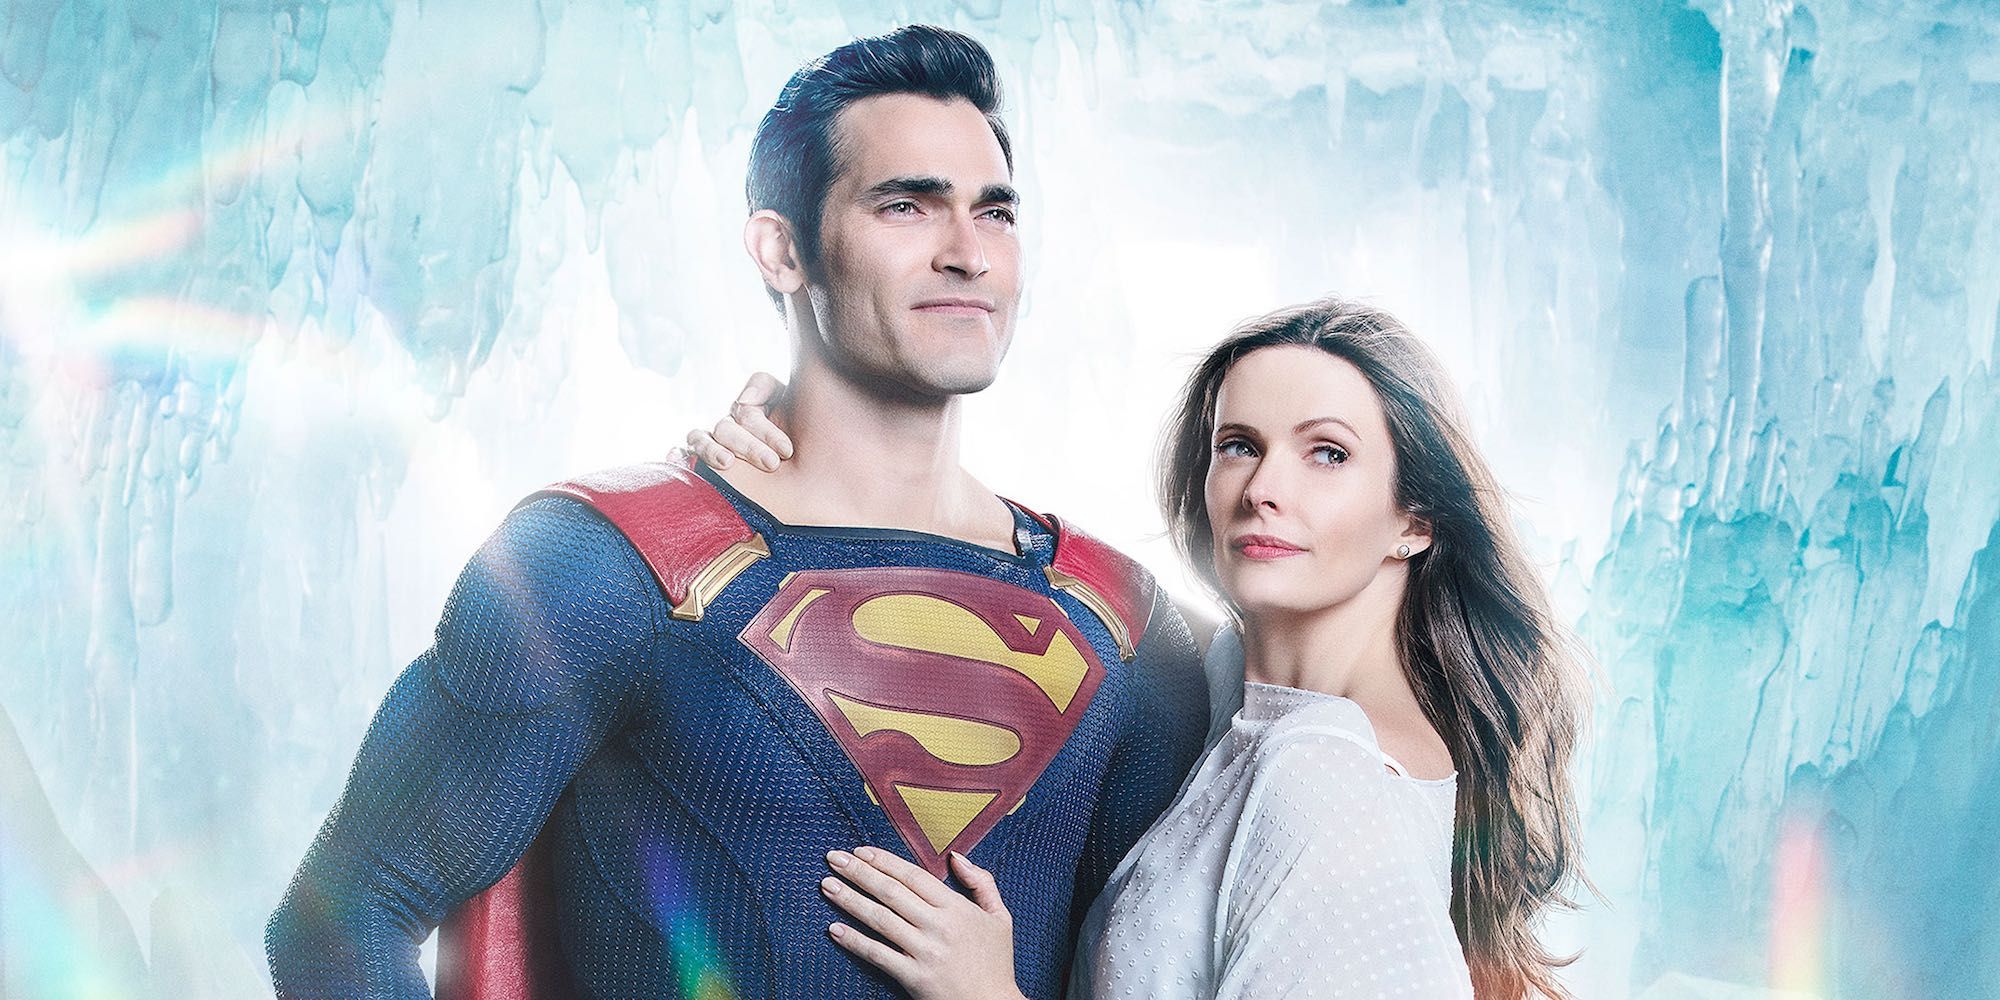 Superman Arrowverse Spinoff TV Show In Development With Tyler Hoechlin